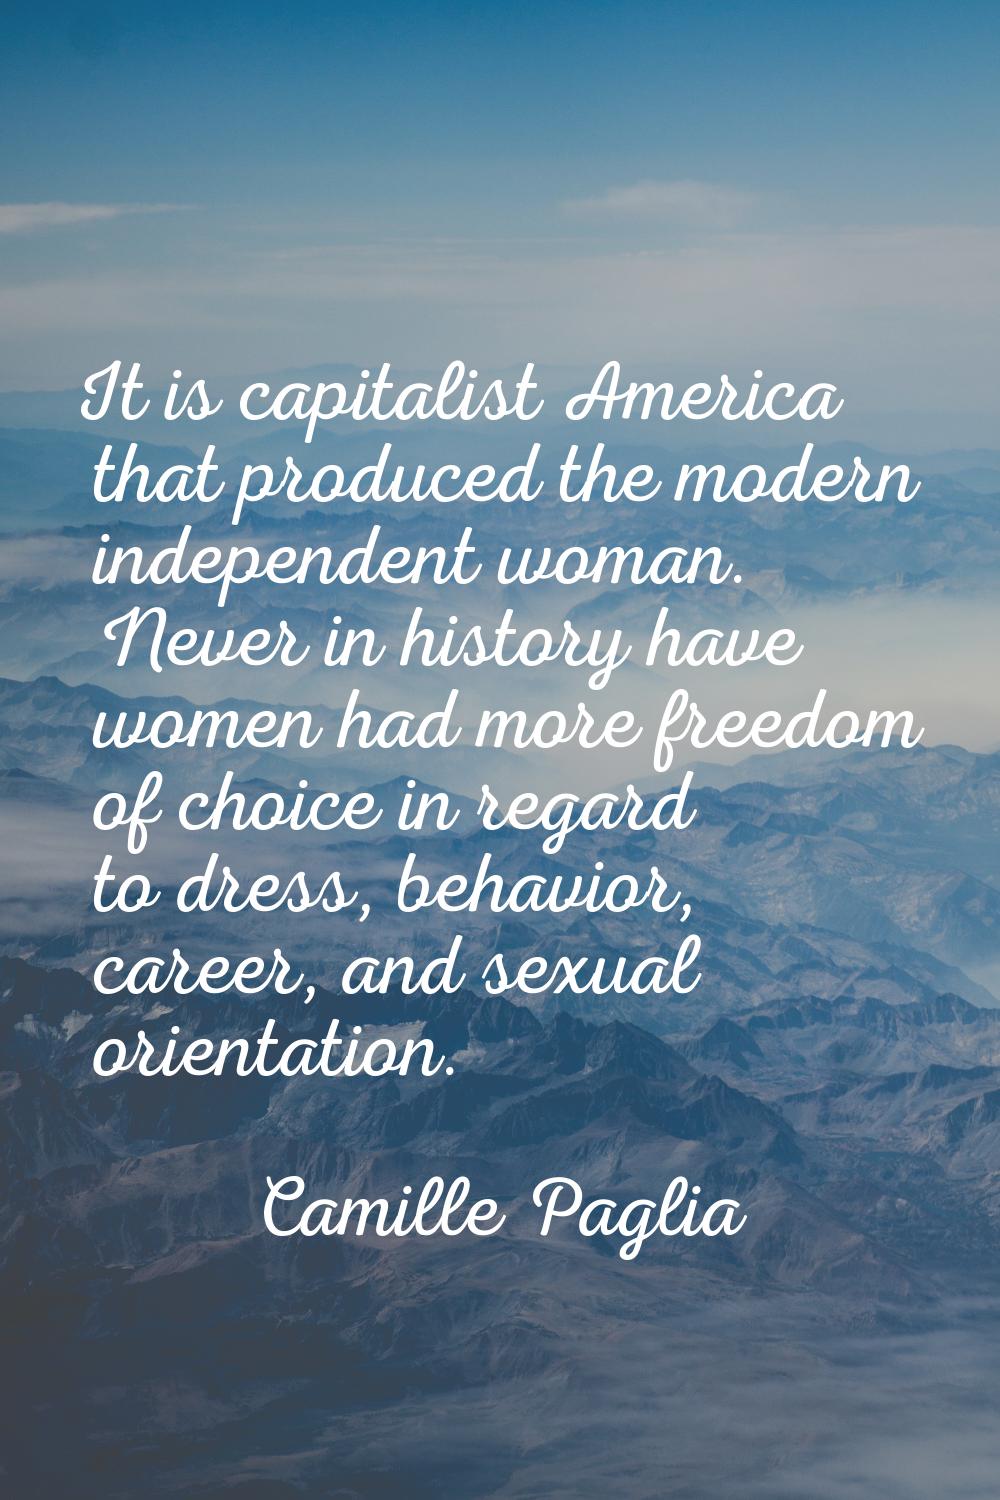 It is capitalist America that produced the modern independent woman. Never in history have women ha